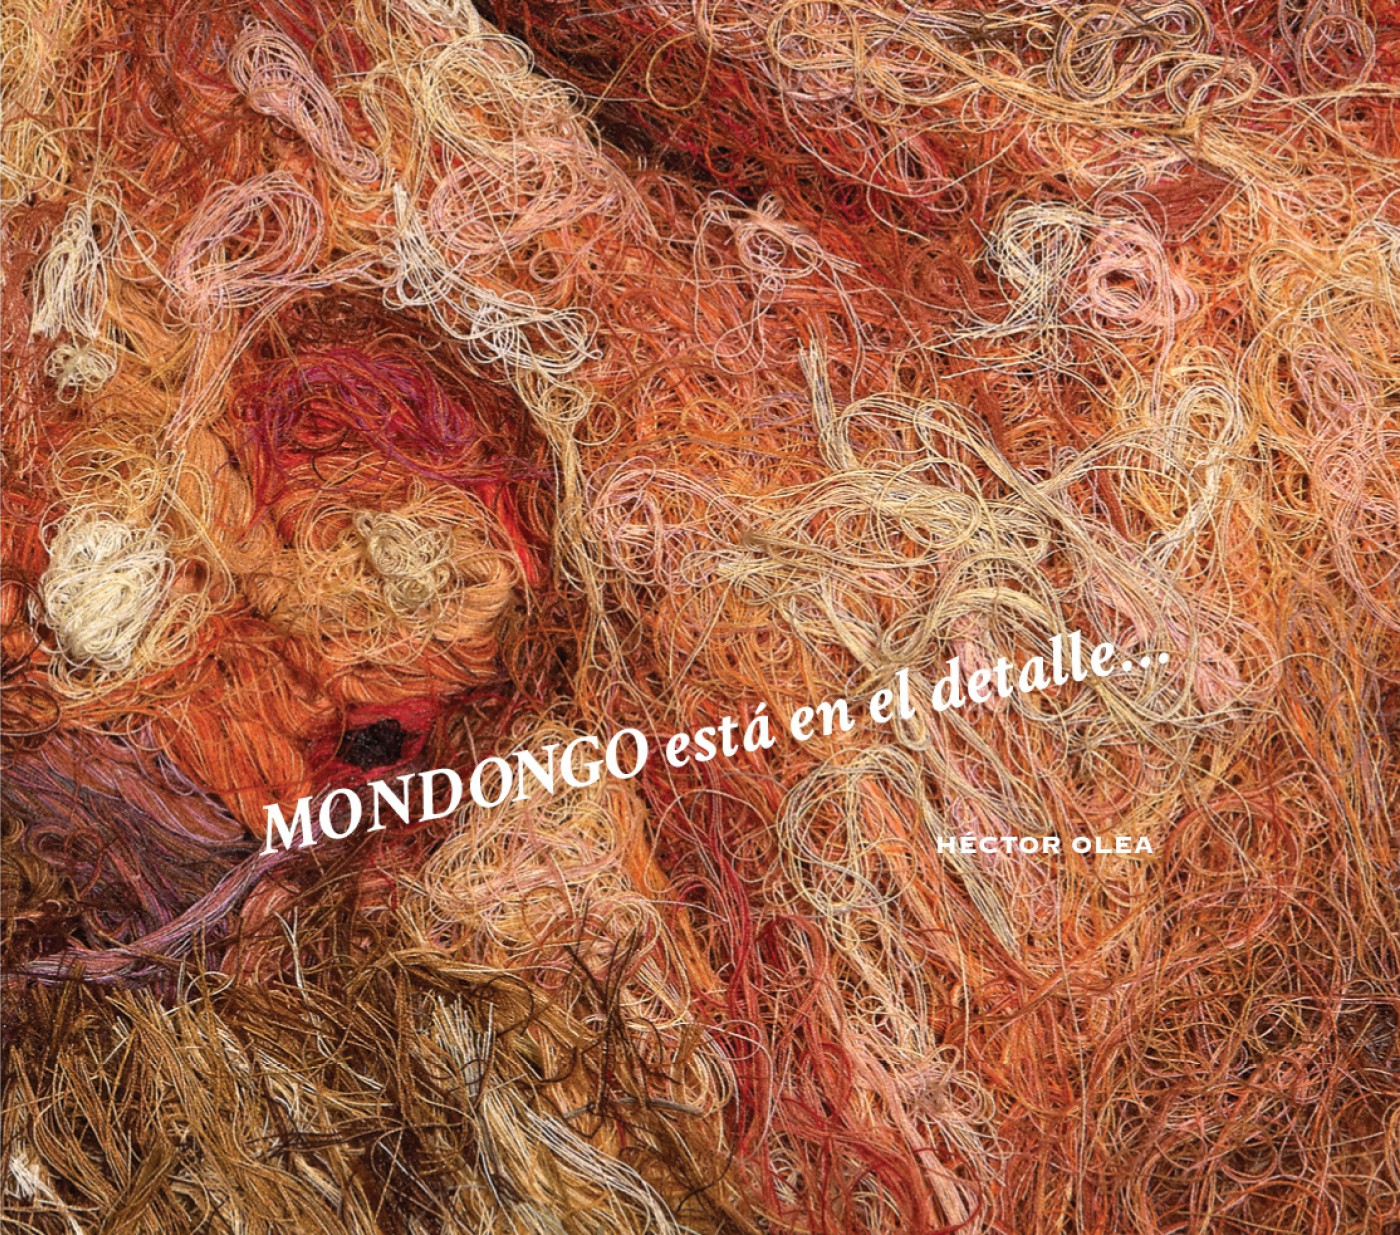 Book cover for Mondongo depicting an image of a large mass of red, orange, brown, and white fibers.